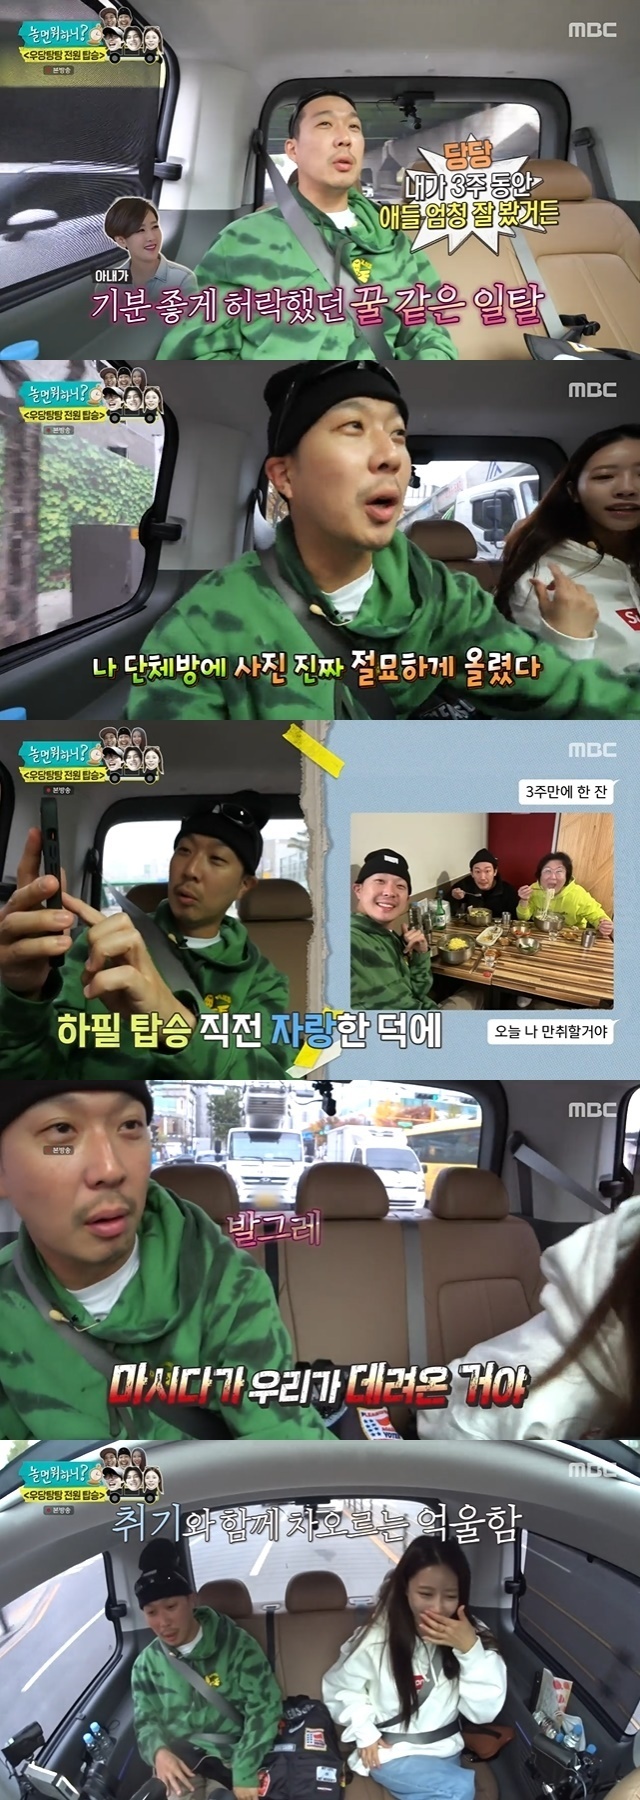 Haha joined the shoot after drinking with an acquaintance.In the 160th episode of MBCs entertainment show Hangout with Yoo (hereinafter referred to as Nol-what), which aired on November 19, a special feature was made on the day the filming was canceled, Woodangtangtang Power Boarding, in which Yoo Jae-Suk had to board the rested members in a power car in time.Haha, who was kidnapped by a car driven by Yoo Jae-suk, who came to pick her up, said, I have to get my kids at 5 oclock.I made a lot of money to spend today. Today is like Christmas. I havent spent 10 years of my marriage blessed like this.I watched the child really well for three weeks, he laughed at the fact that he was making an unexpected shot while making fun of it in earnest.Following Haha, Lee Mi-joo joined the group, and as he picked up the last runner, Jeong Jun-ha, who knew nothing, Haha said, I posted a really exquisite photo in the group room. I did not talk about shooting amazingly.It seems to be a situation that Jeong Jun-ha became a secret camera.Lee Mi-joo said, I really thought you were drinking right now, and the rest of the members shouted with one voice, I brought you here while drinking. Lee Mi-joo said, Why is my brothers face (face) so red?Why did you bring him here? she exclaimed, laughing.